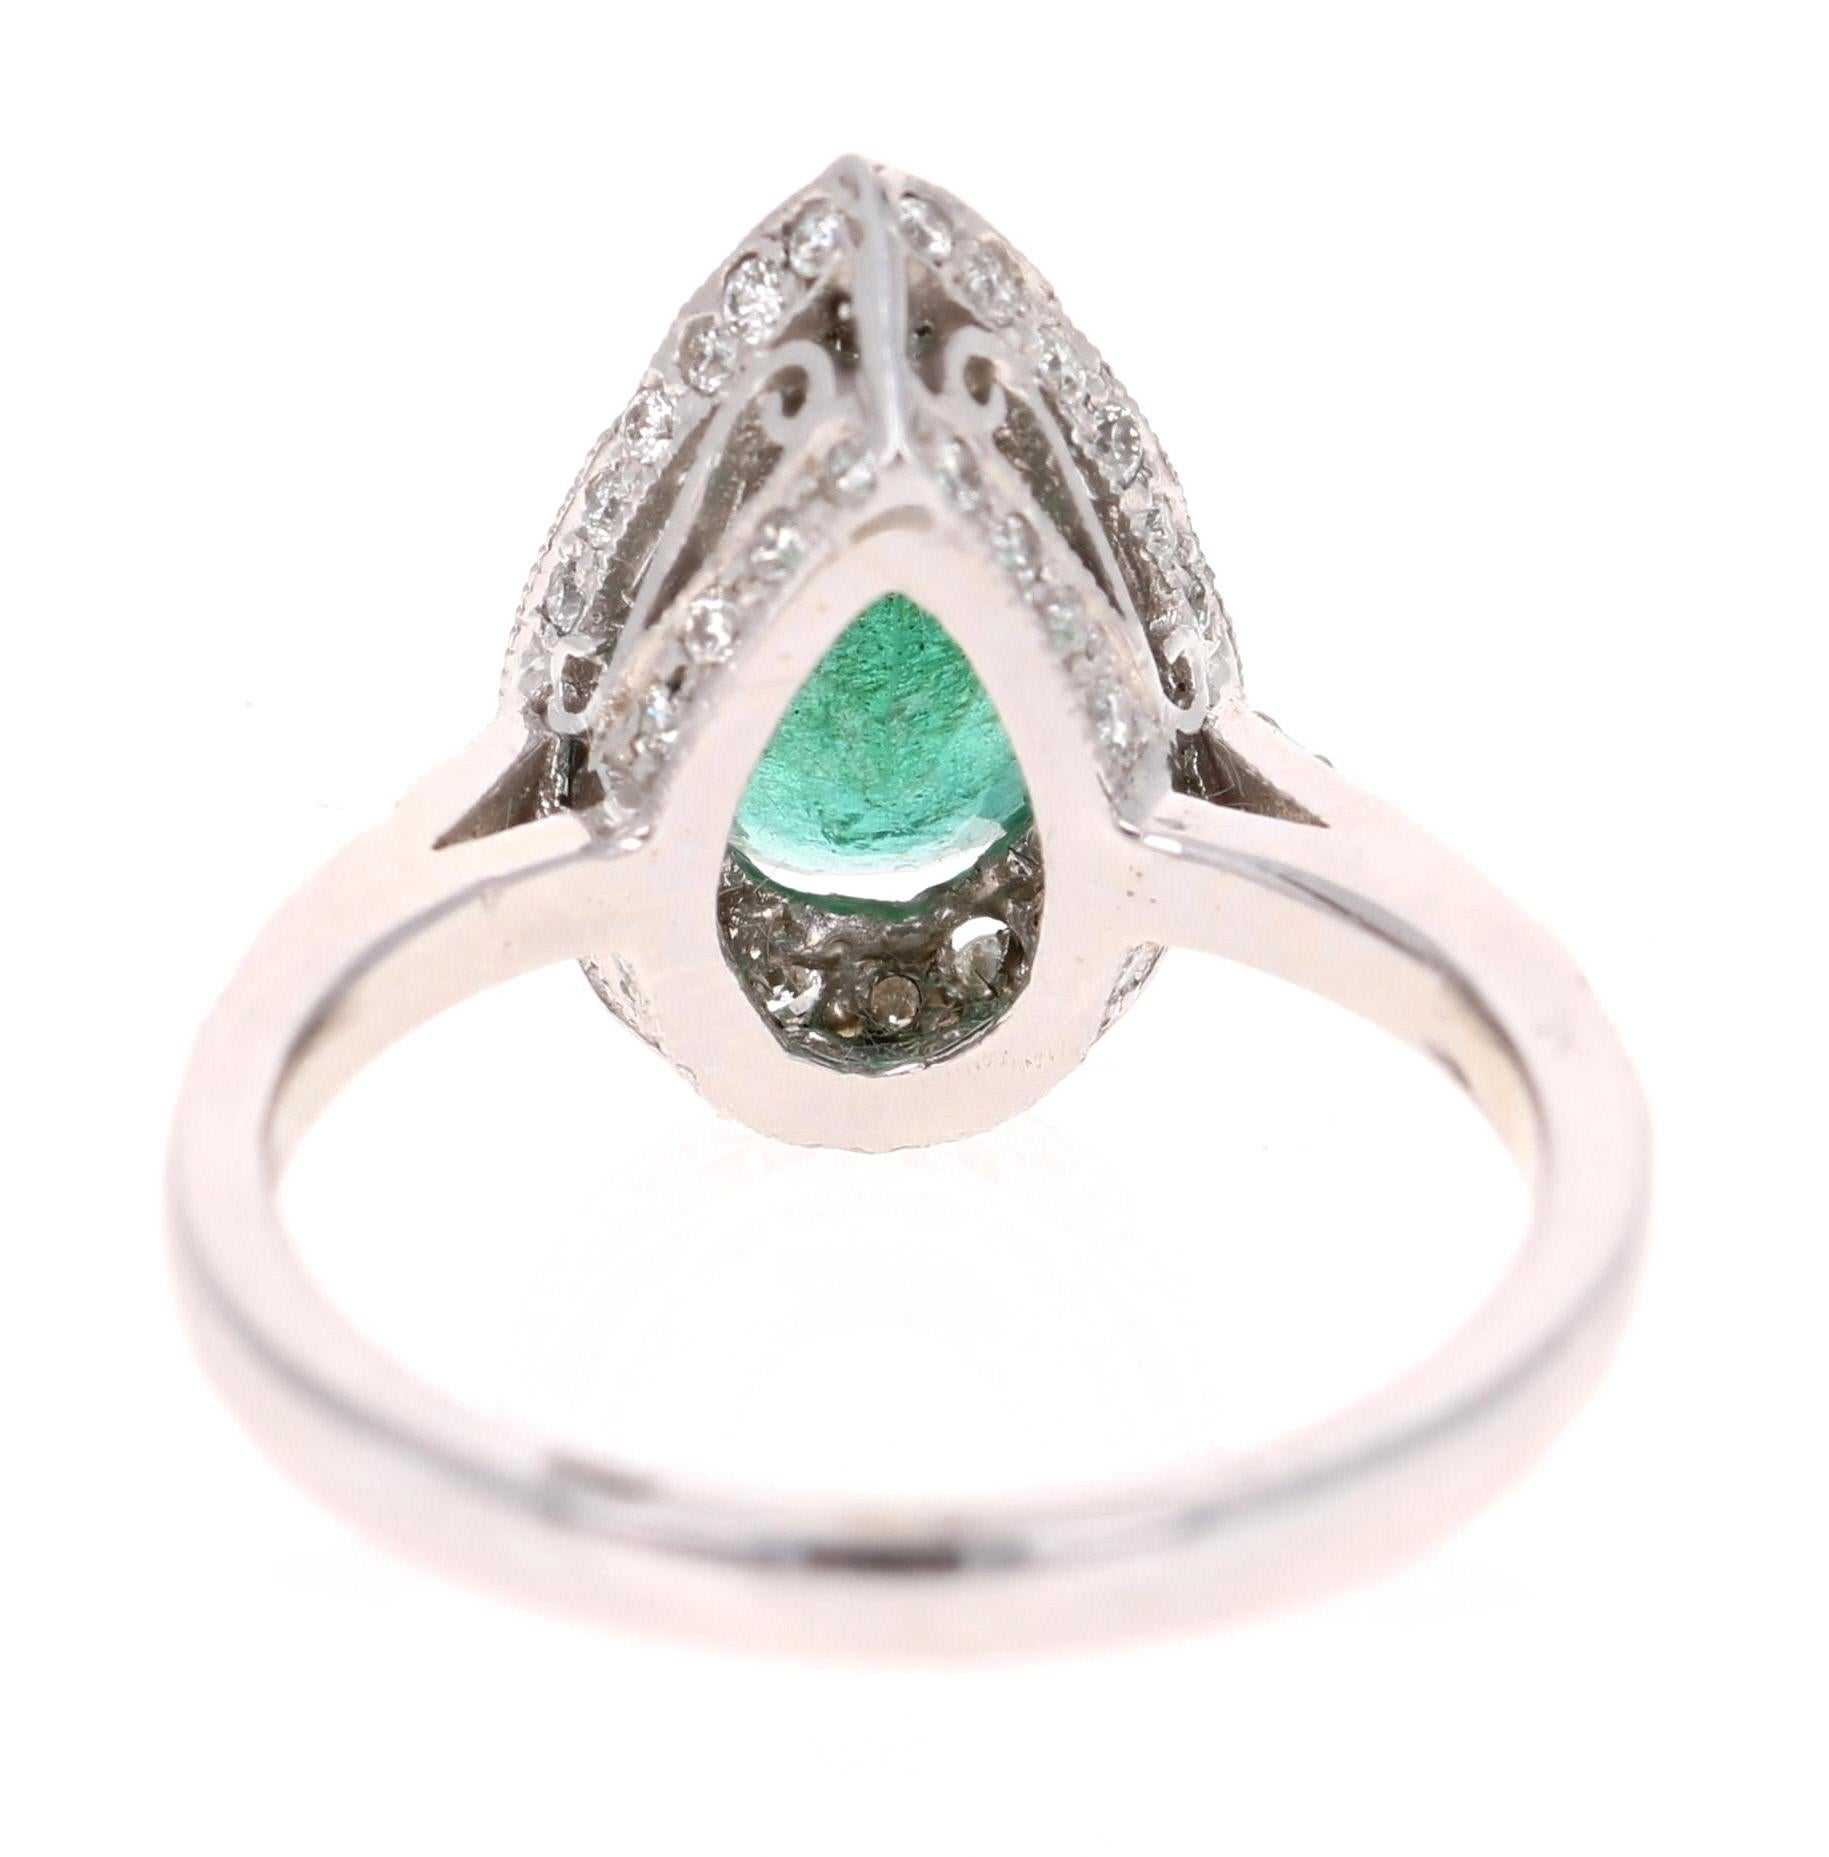 2.07 Carat Pear Cut Emerald Diamond Halo 14 Karat Gold Ring In New Condition For Sale In Los Angeles, CA